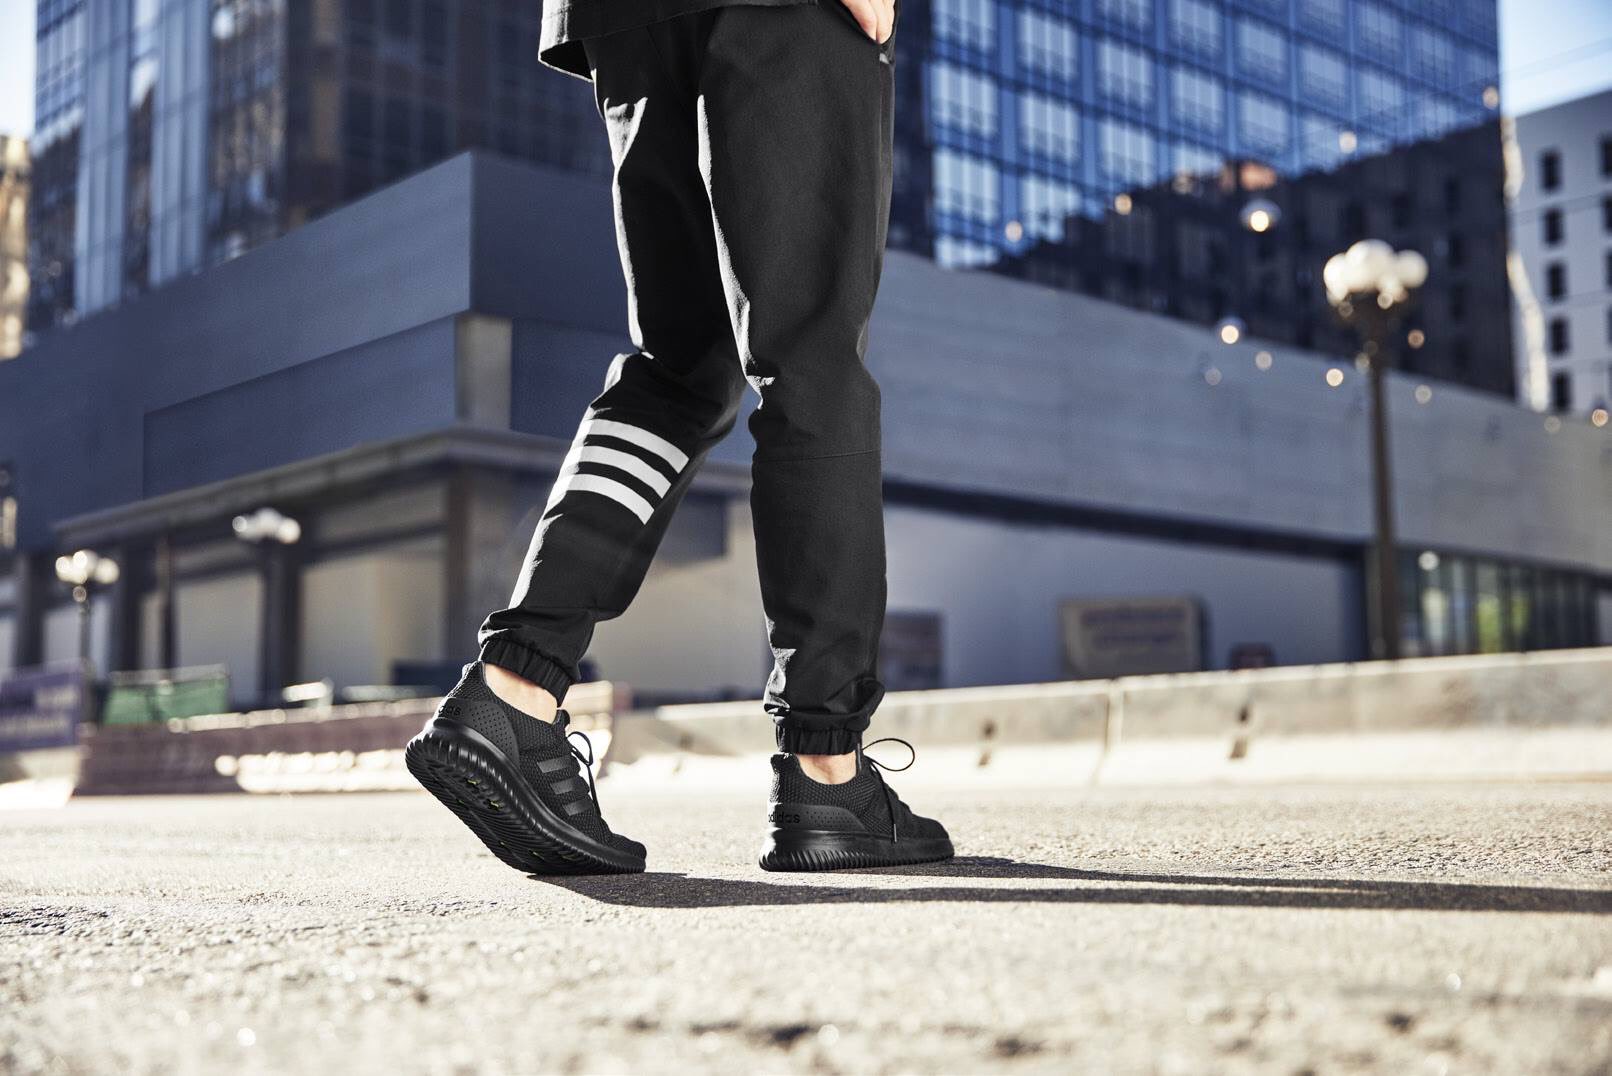 Intersport Wetherill Park on "Endless comfort. style. The # Adidas CLOUDFOAM ⚫️. Available now. #Intersport #SportToThePeople https://t.co/P3lOflWvDS" / X